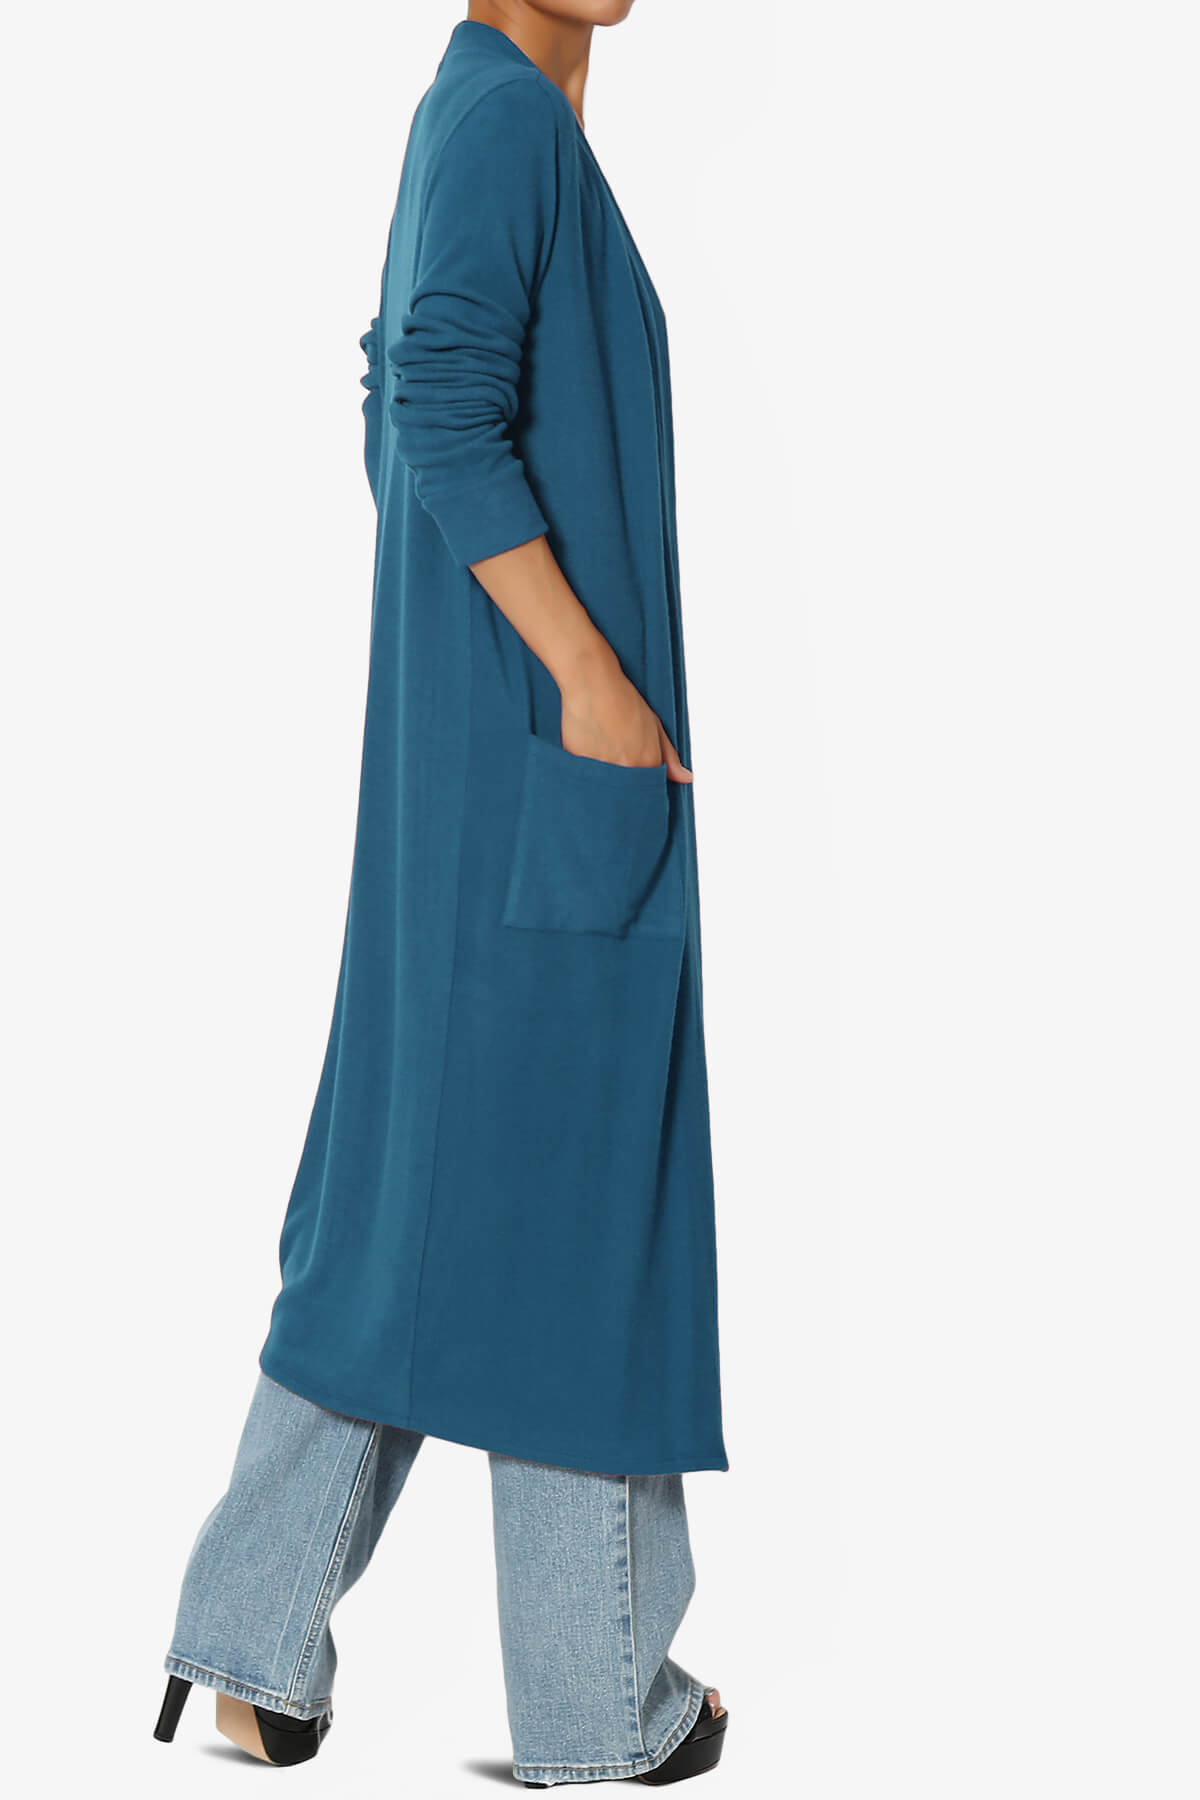 Load image into Gallery viewer, Noelle Extra Long Duster Knit Cardigan TEAL_4
